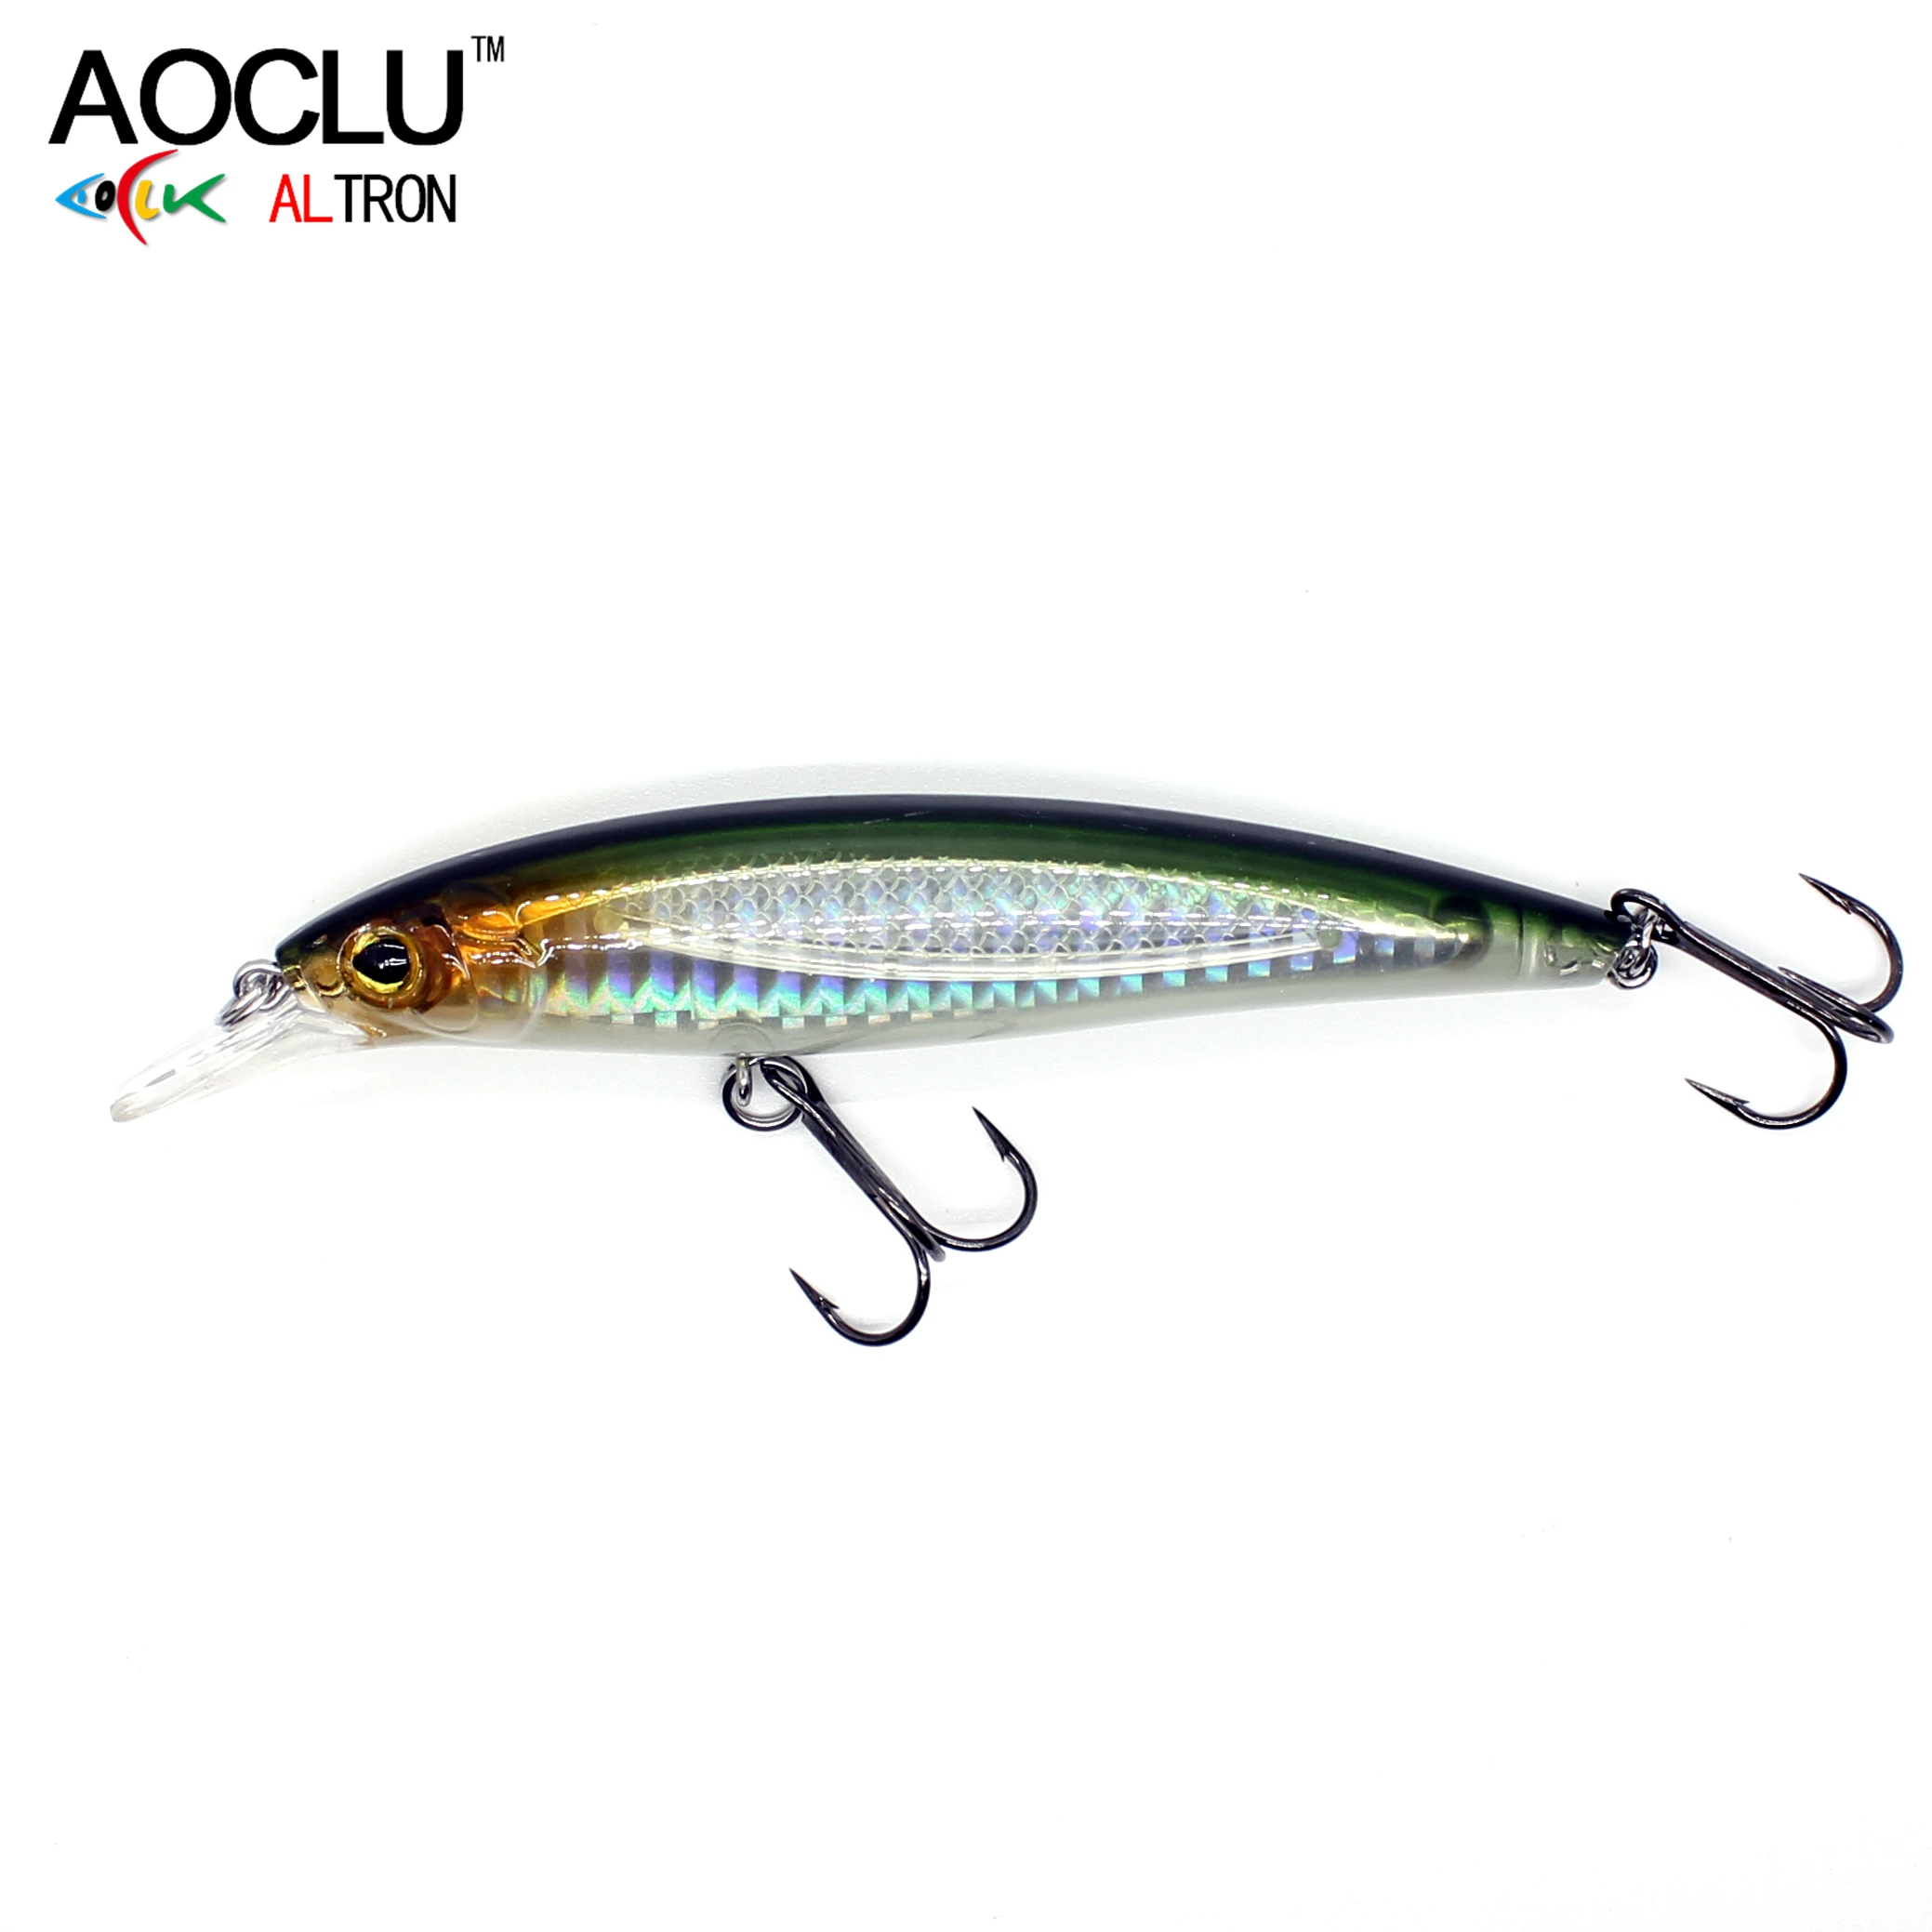 

AOCLU Hot Sale Sinking Wobbler 100mm 15g Hard Bait Minnow Crank Fishing Lure Diving 1.2m Saltwater Bass Fresh With VMC Hooks, 6 colors